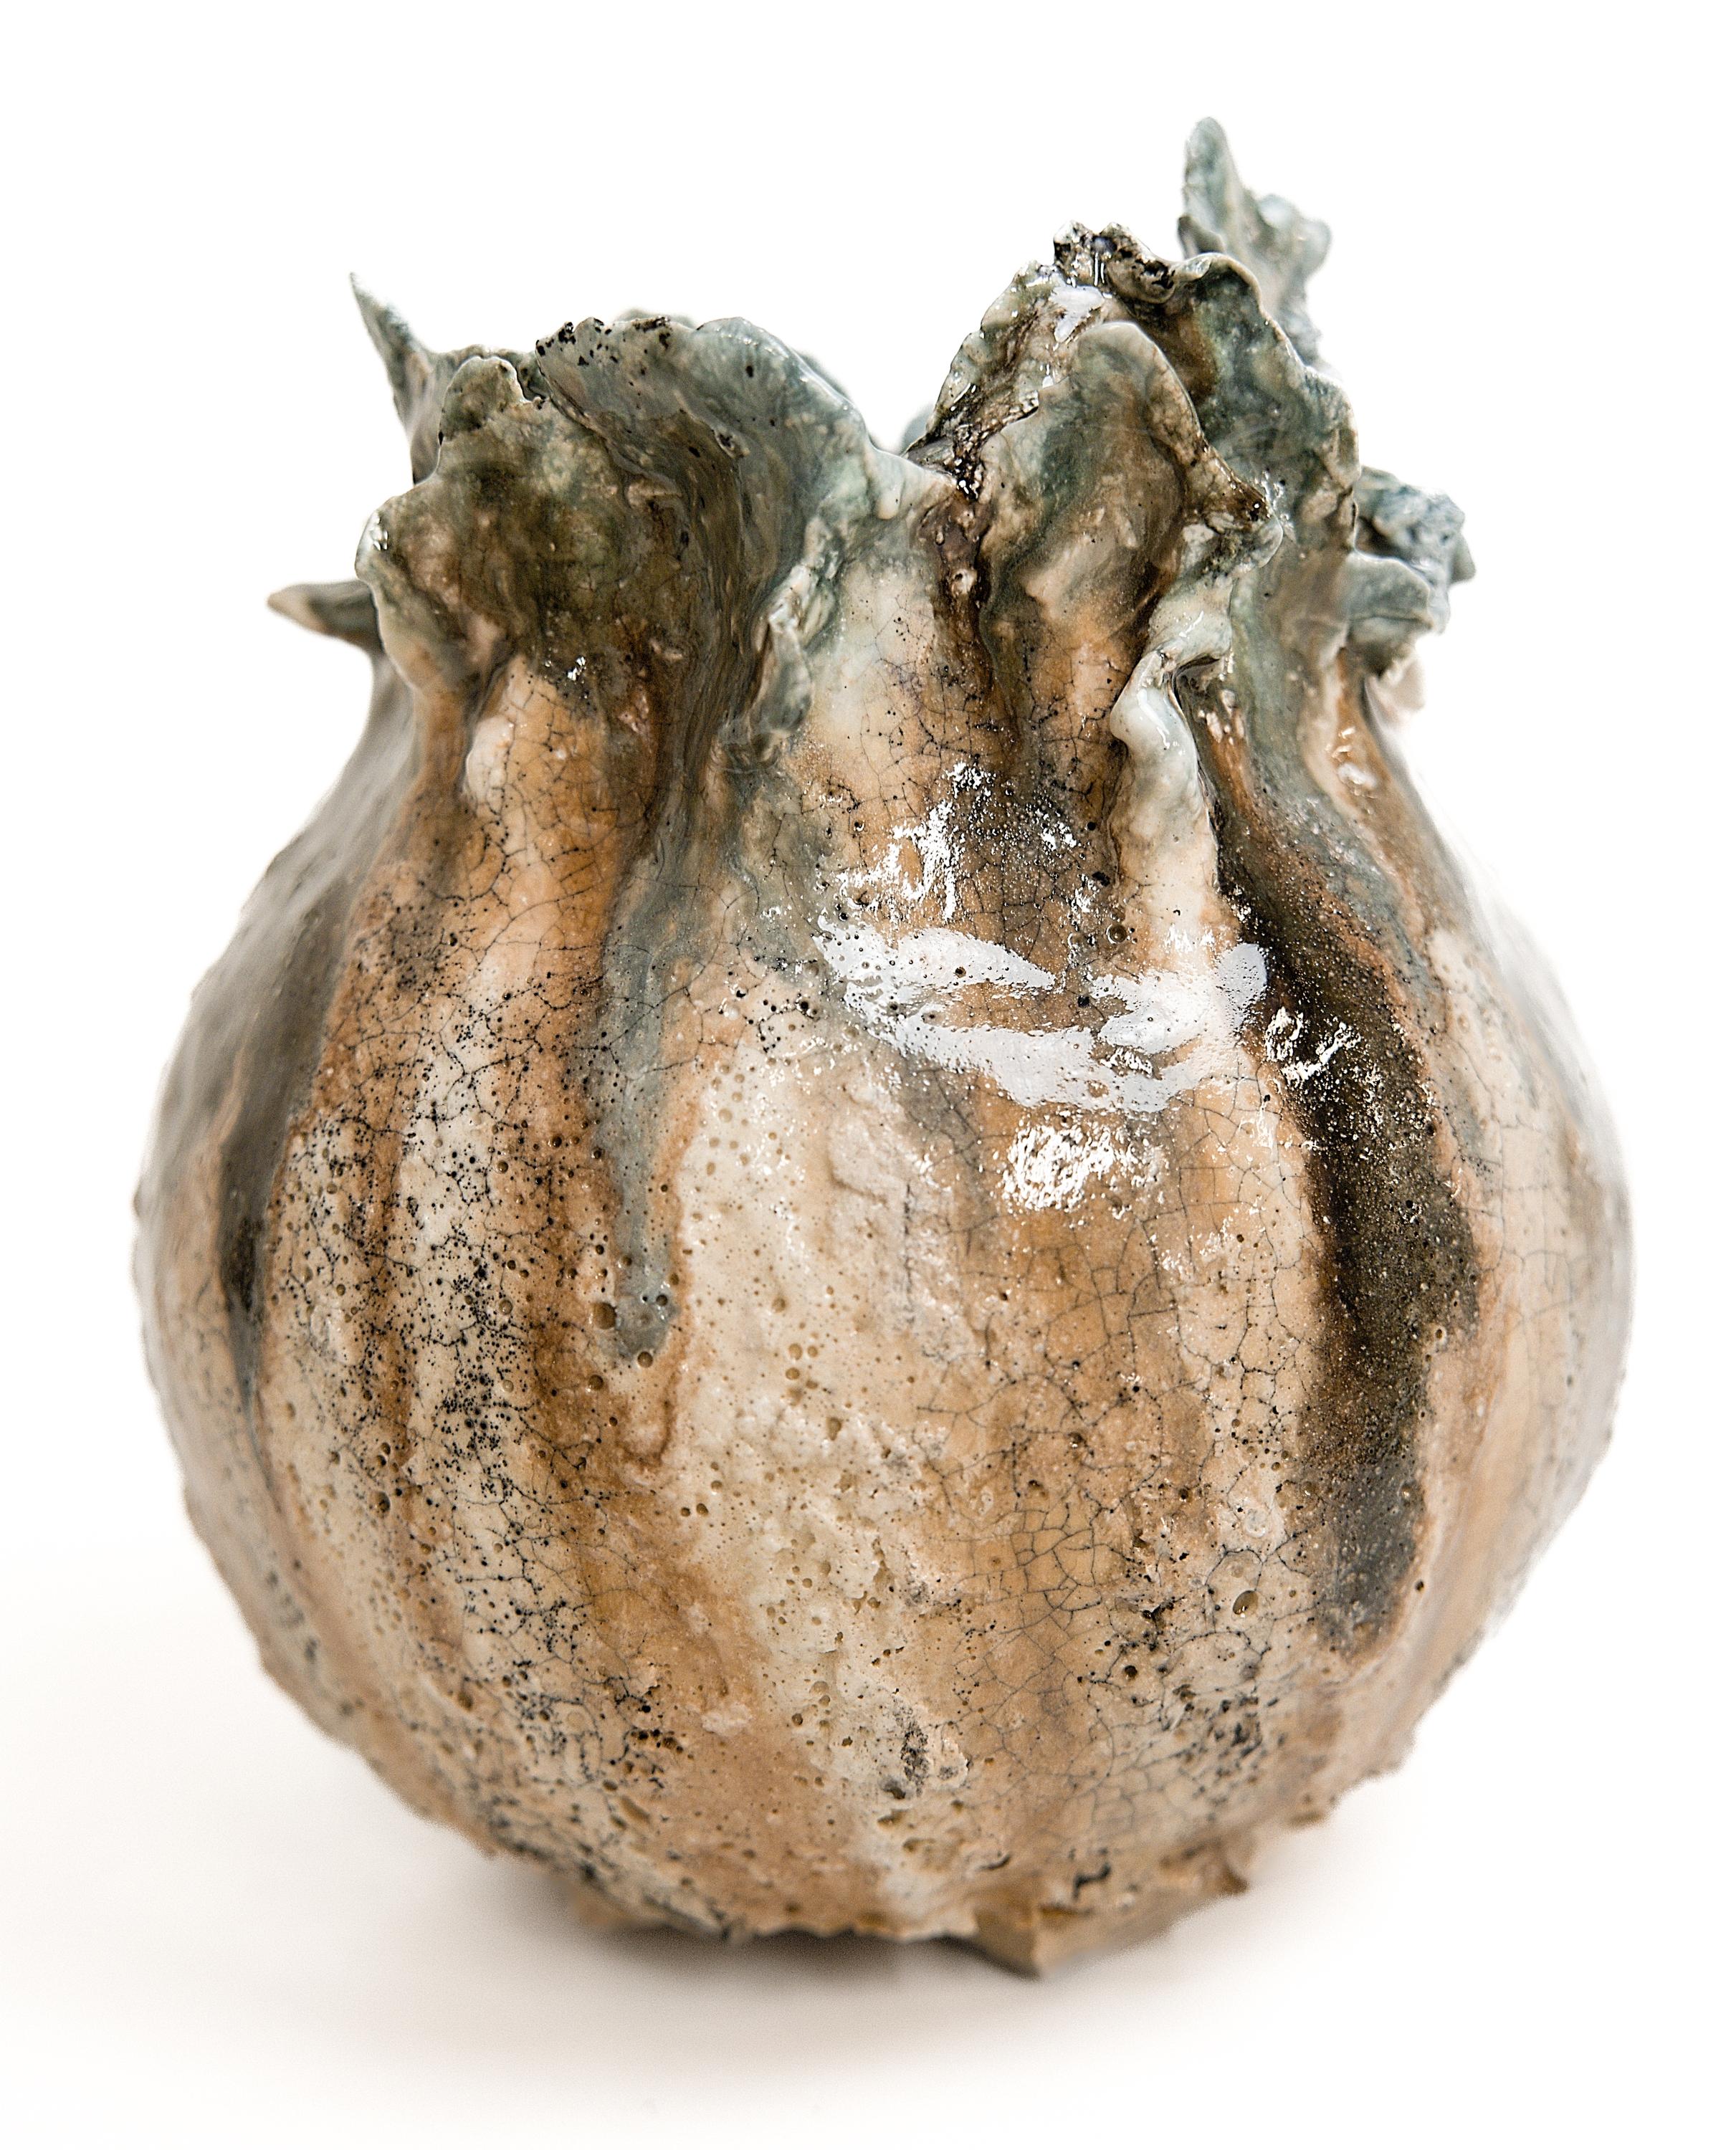 Bring a touch of modern style to your home with our Yeonhwa Jars. ( Lotus Flower Jars)
this White moon jar with with deep greens and lava glaze

., each striking vase features a unique, moon-like design in an eye-catching light lava glaze.
Please